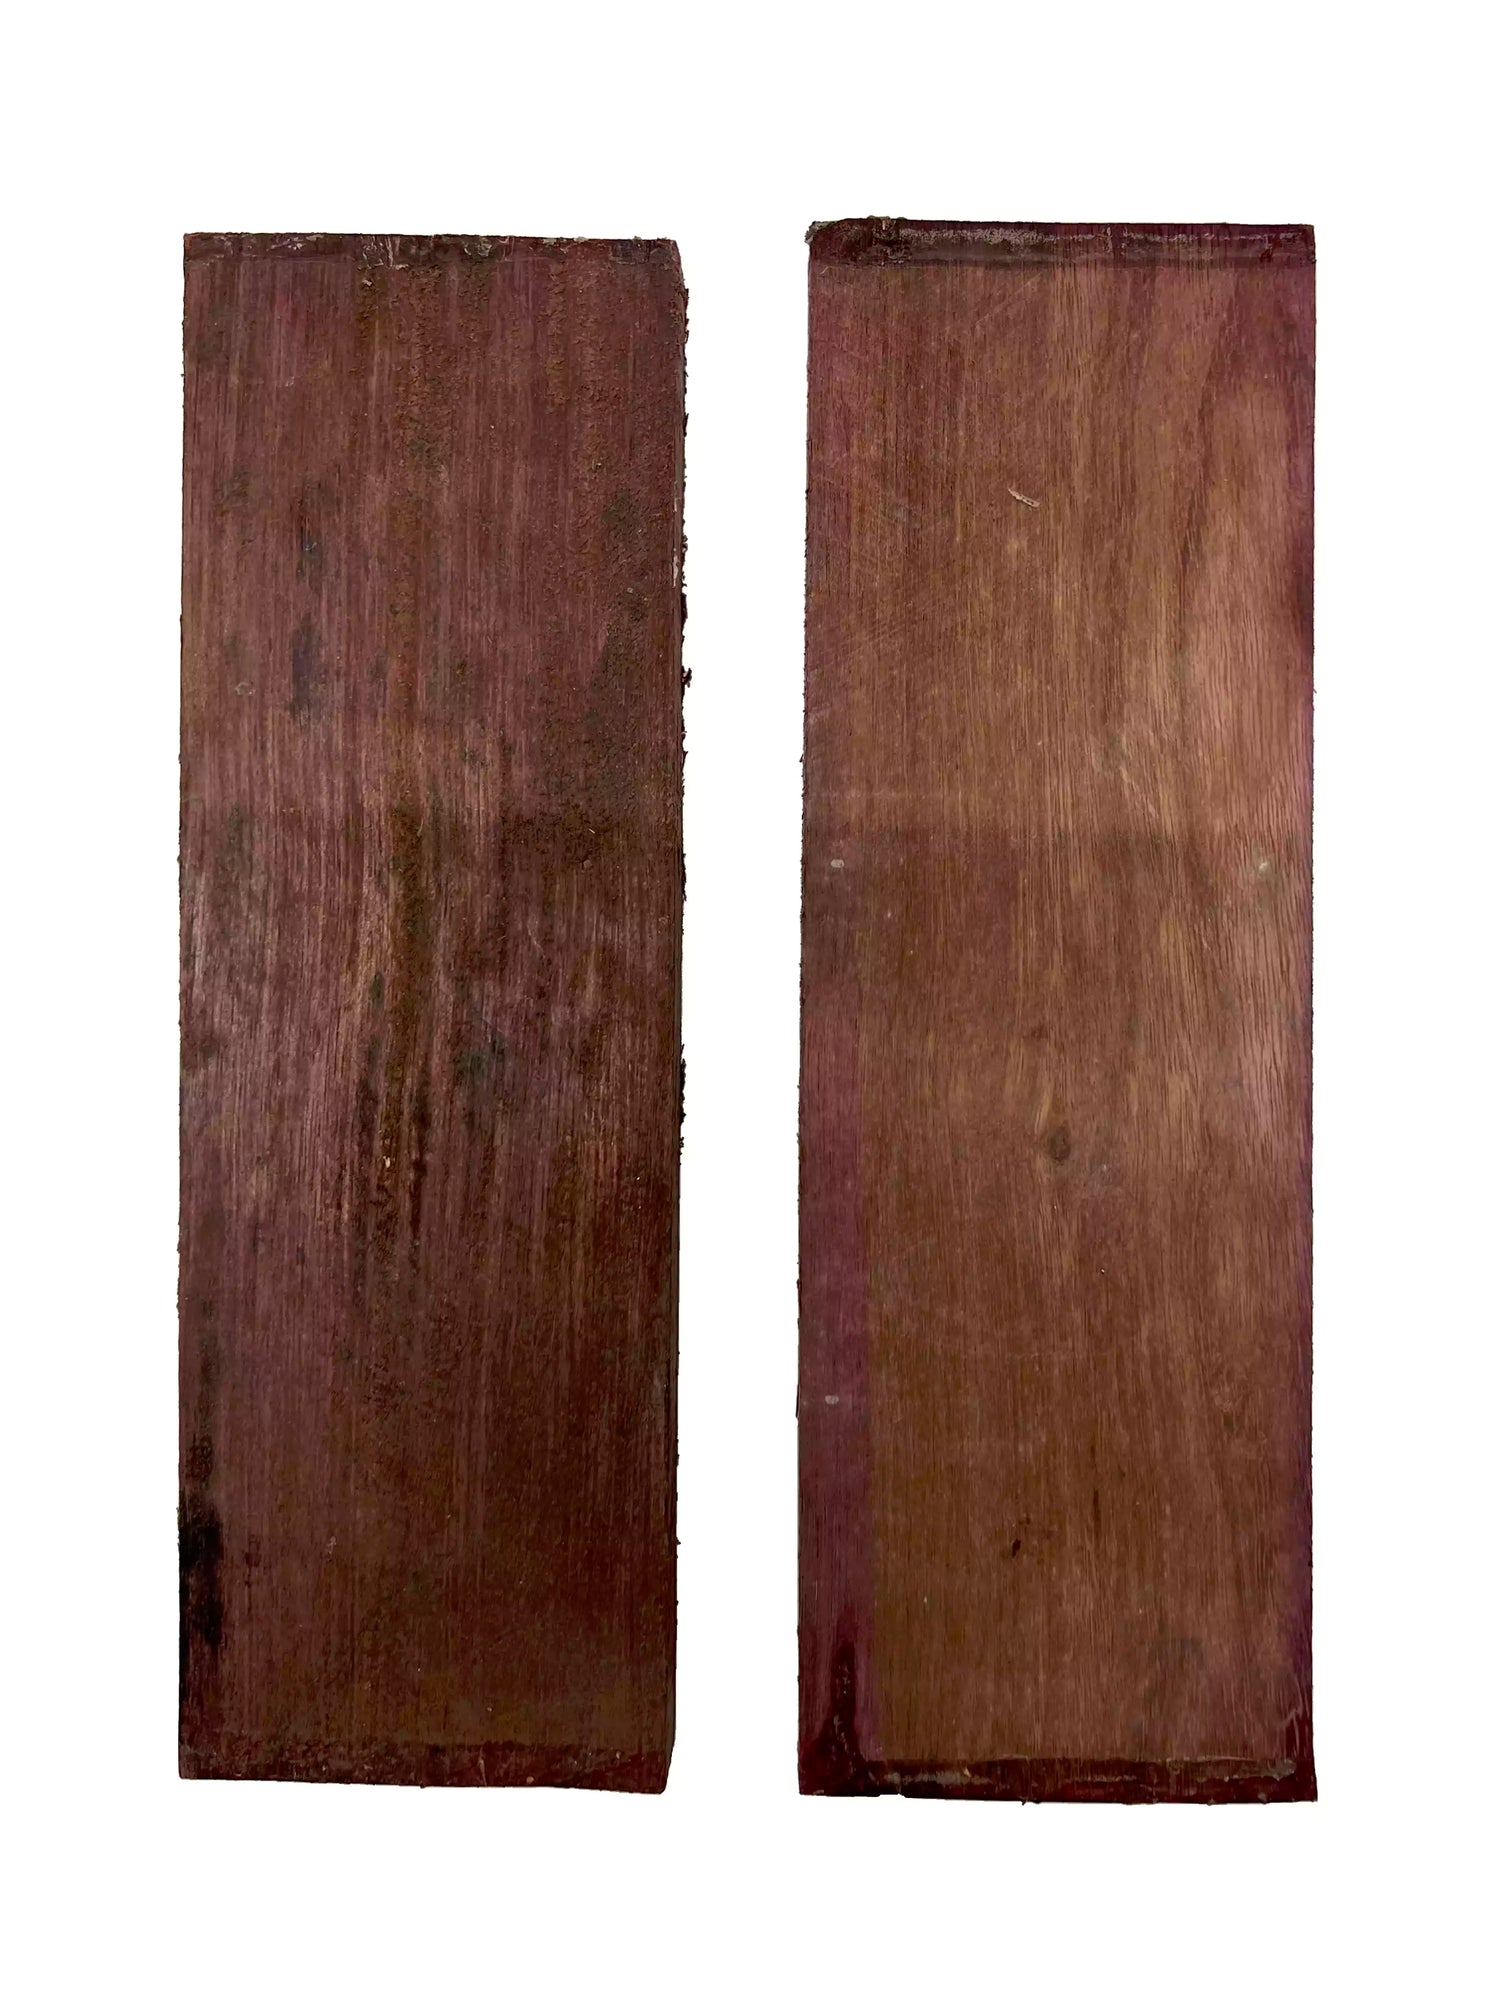 Pack of 2, Purpleheart Thin Stock Three Dimensional Lumber Board 12&quot; x 4&quot; x 3/4&quot; 